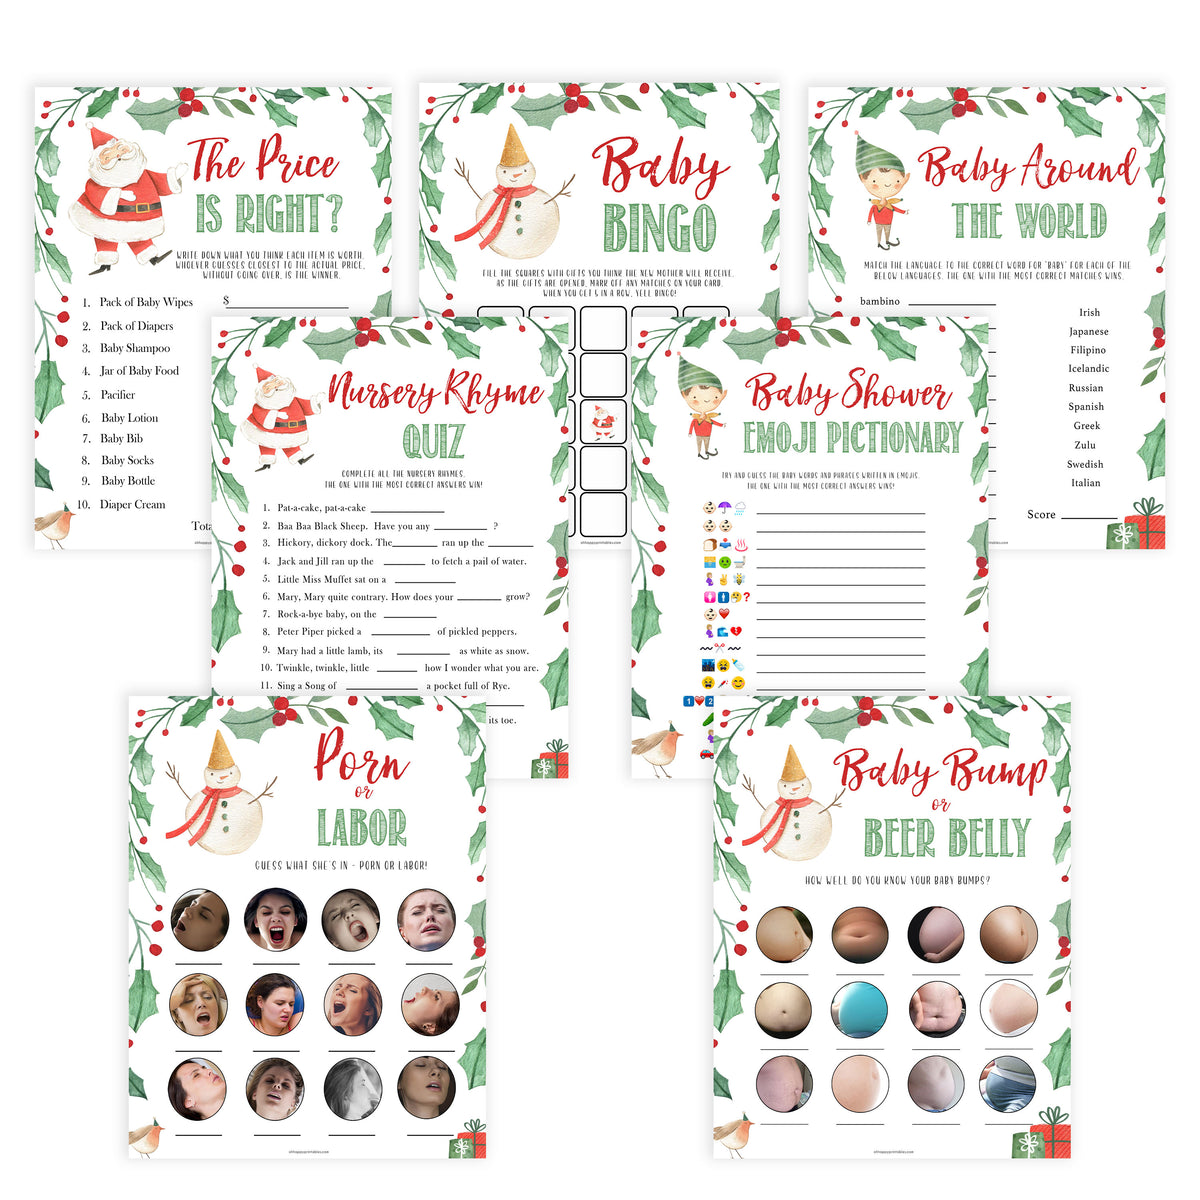 Christmas baby shower games, 7 baby shower games, festive baby shower games, best baby shower games, top 10 baby games, baby shower ideas, baby shower games